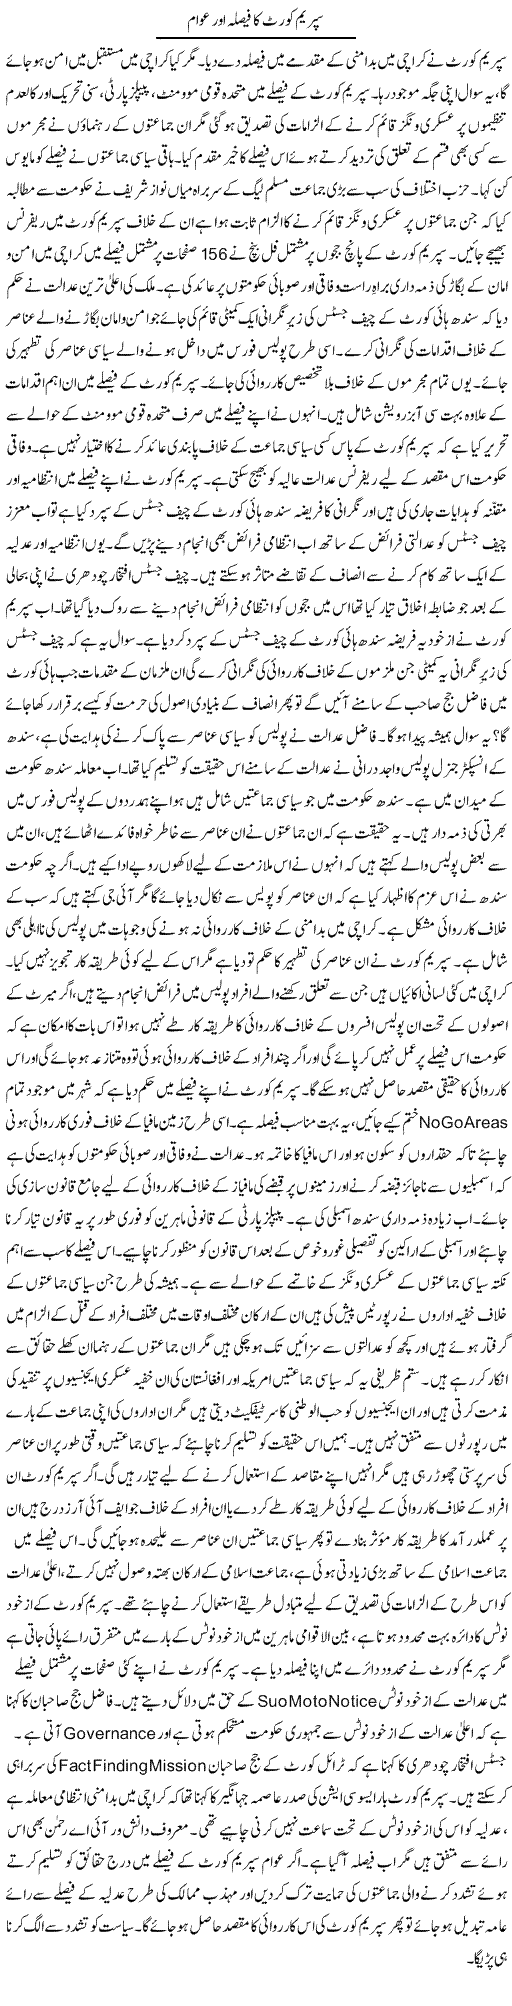 Supreme Court Express Column Tauseef Ahmed 12 October 2011